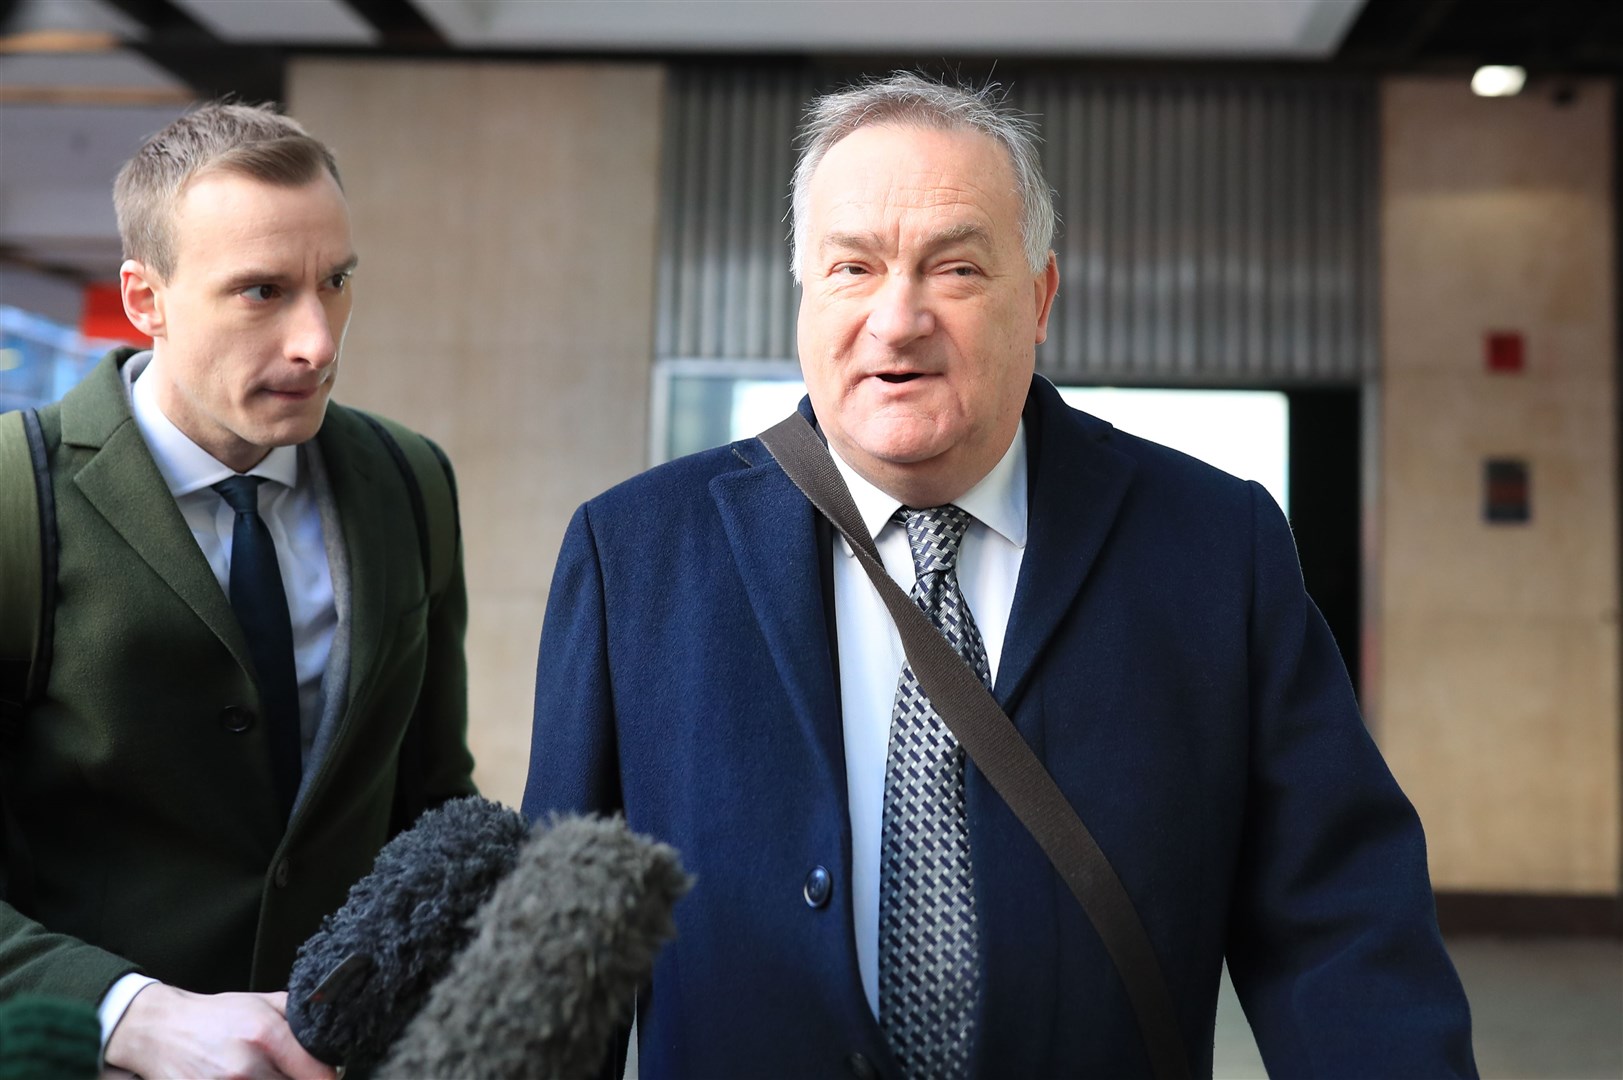 Nick Brown lost the Labour whip pending the outcome of an internal investigation into a complaint against him (Aaron Chown/PA)